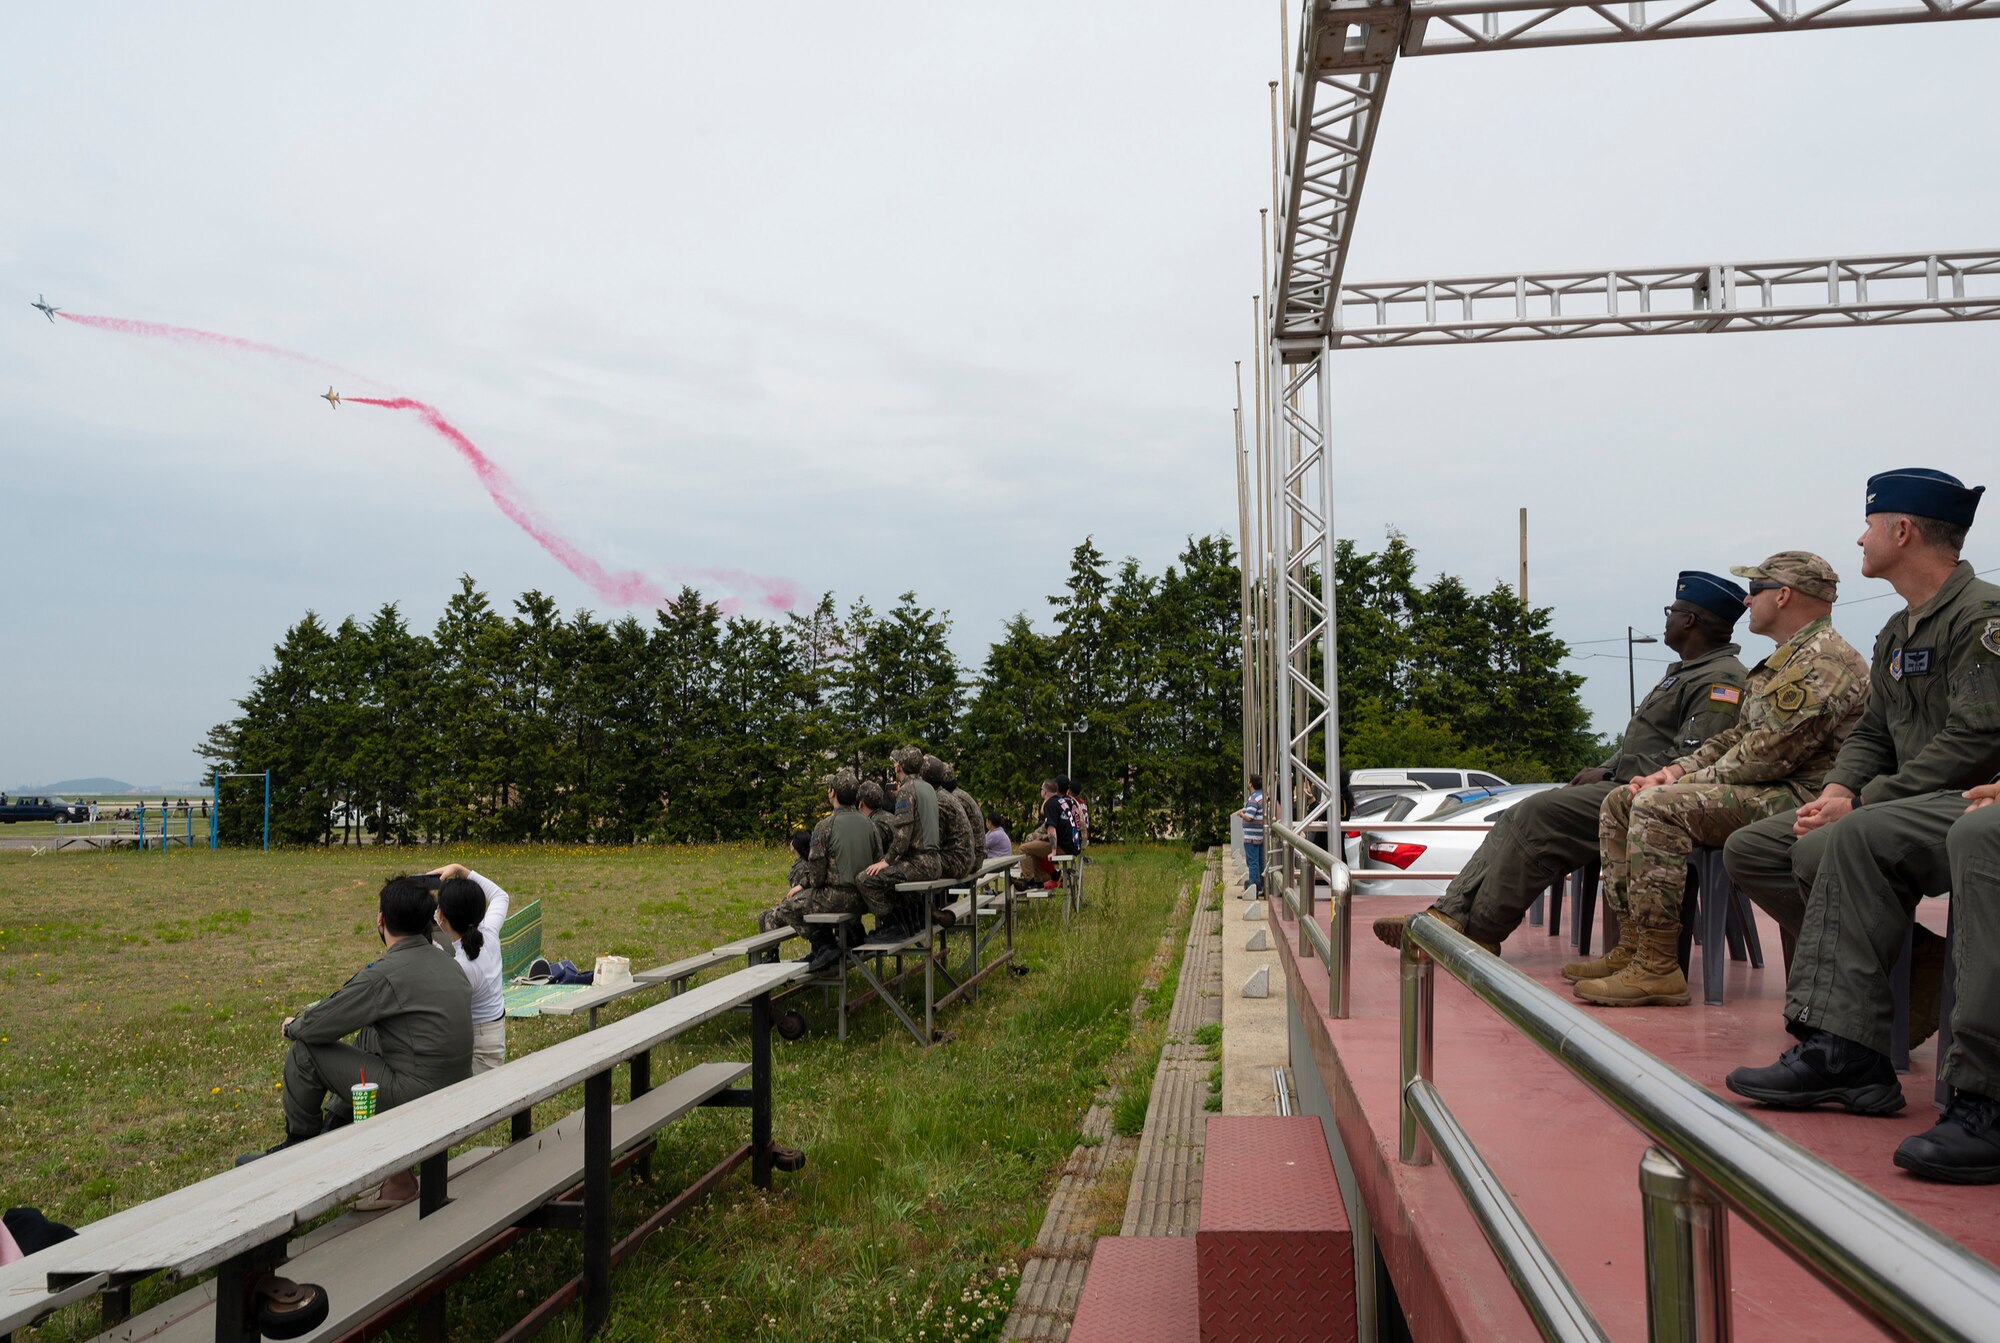 Members of the 8th Fighter Wing leadership watch the Black Eagle jets fly.